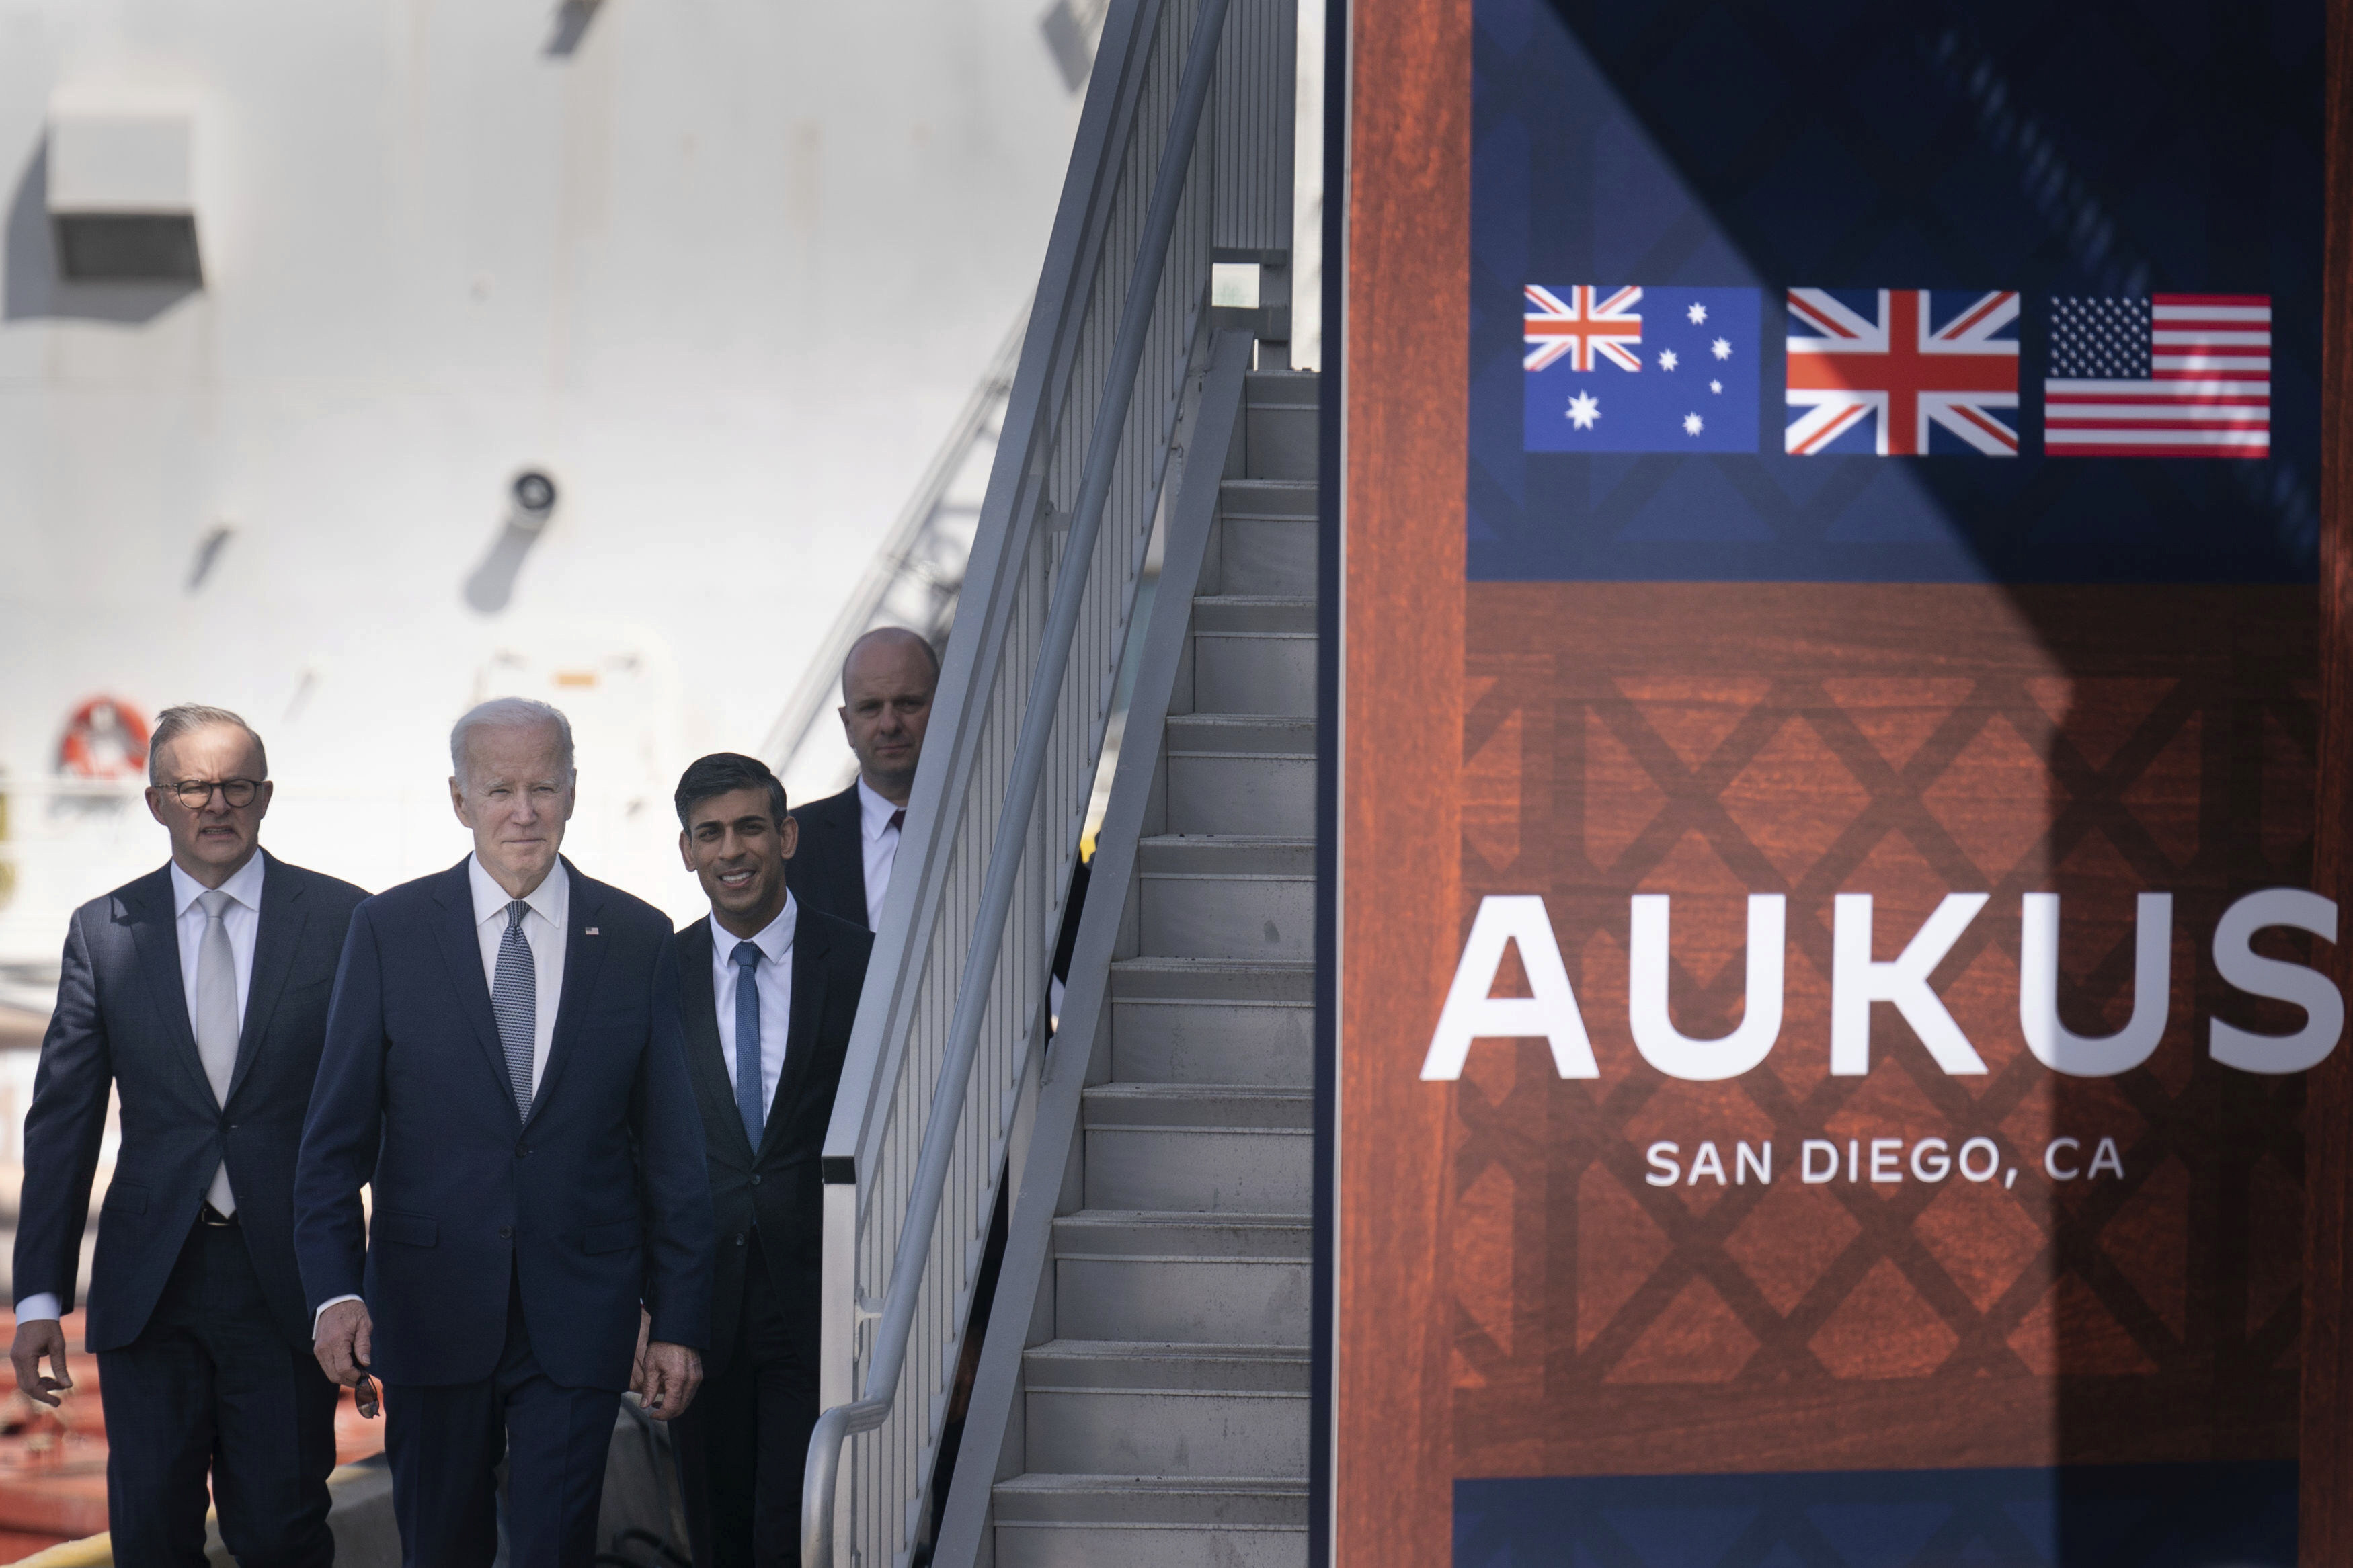 From the left, Australian Prime Minister Anthony Albanese walks with US President Joe Biden and British Prime Minister Rishi Sunak at Point Loma naval base in San Diego, California, on March 13. The three nations make up Aukus, a trilateral security pact for the Indo-Pacific region. Photo: AP  